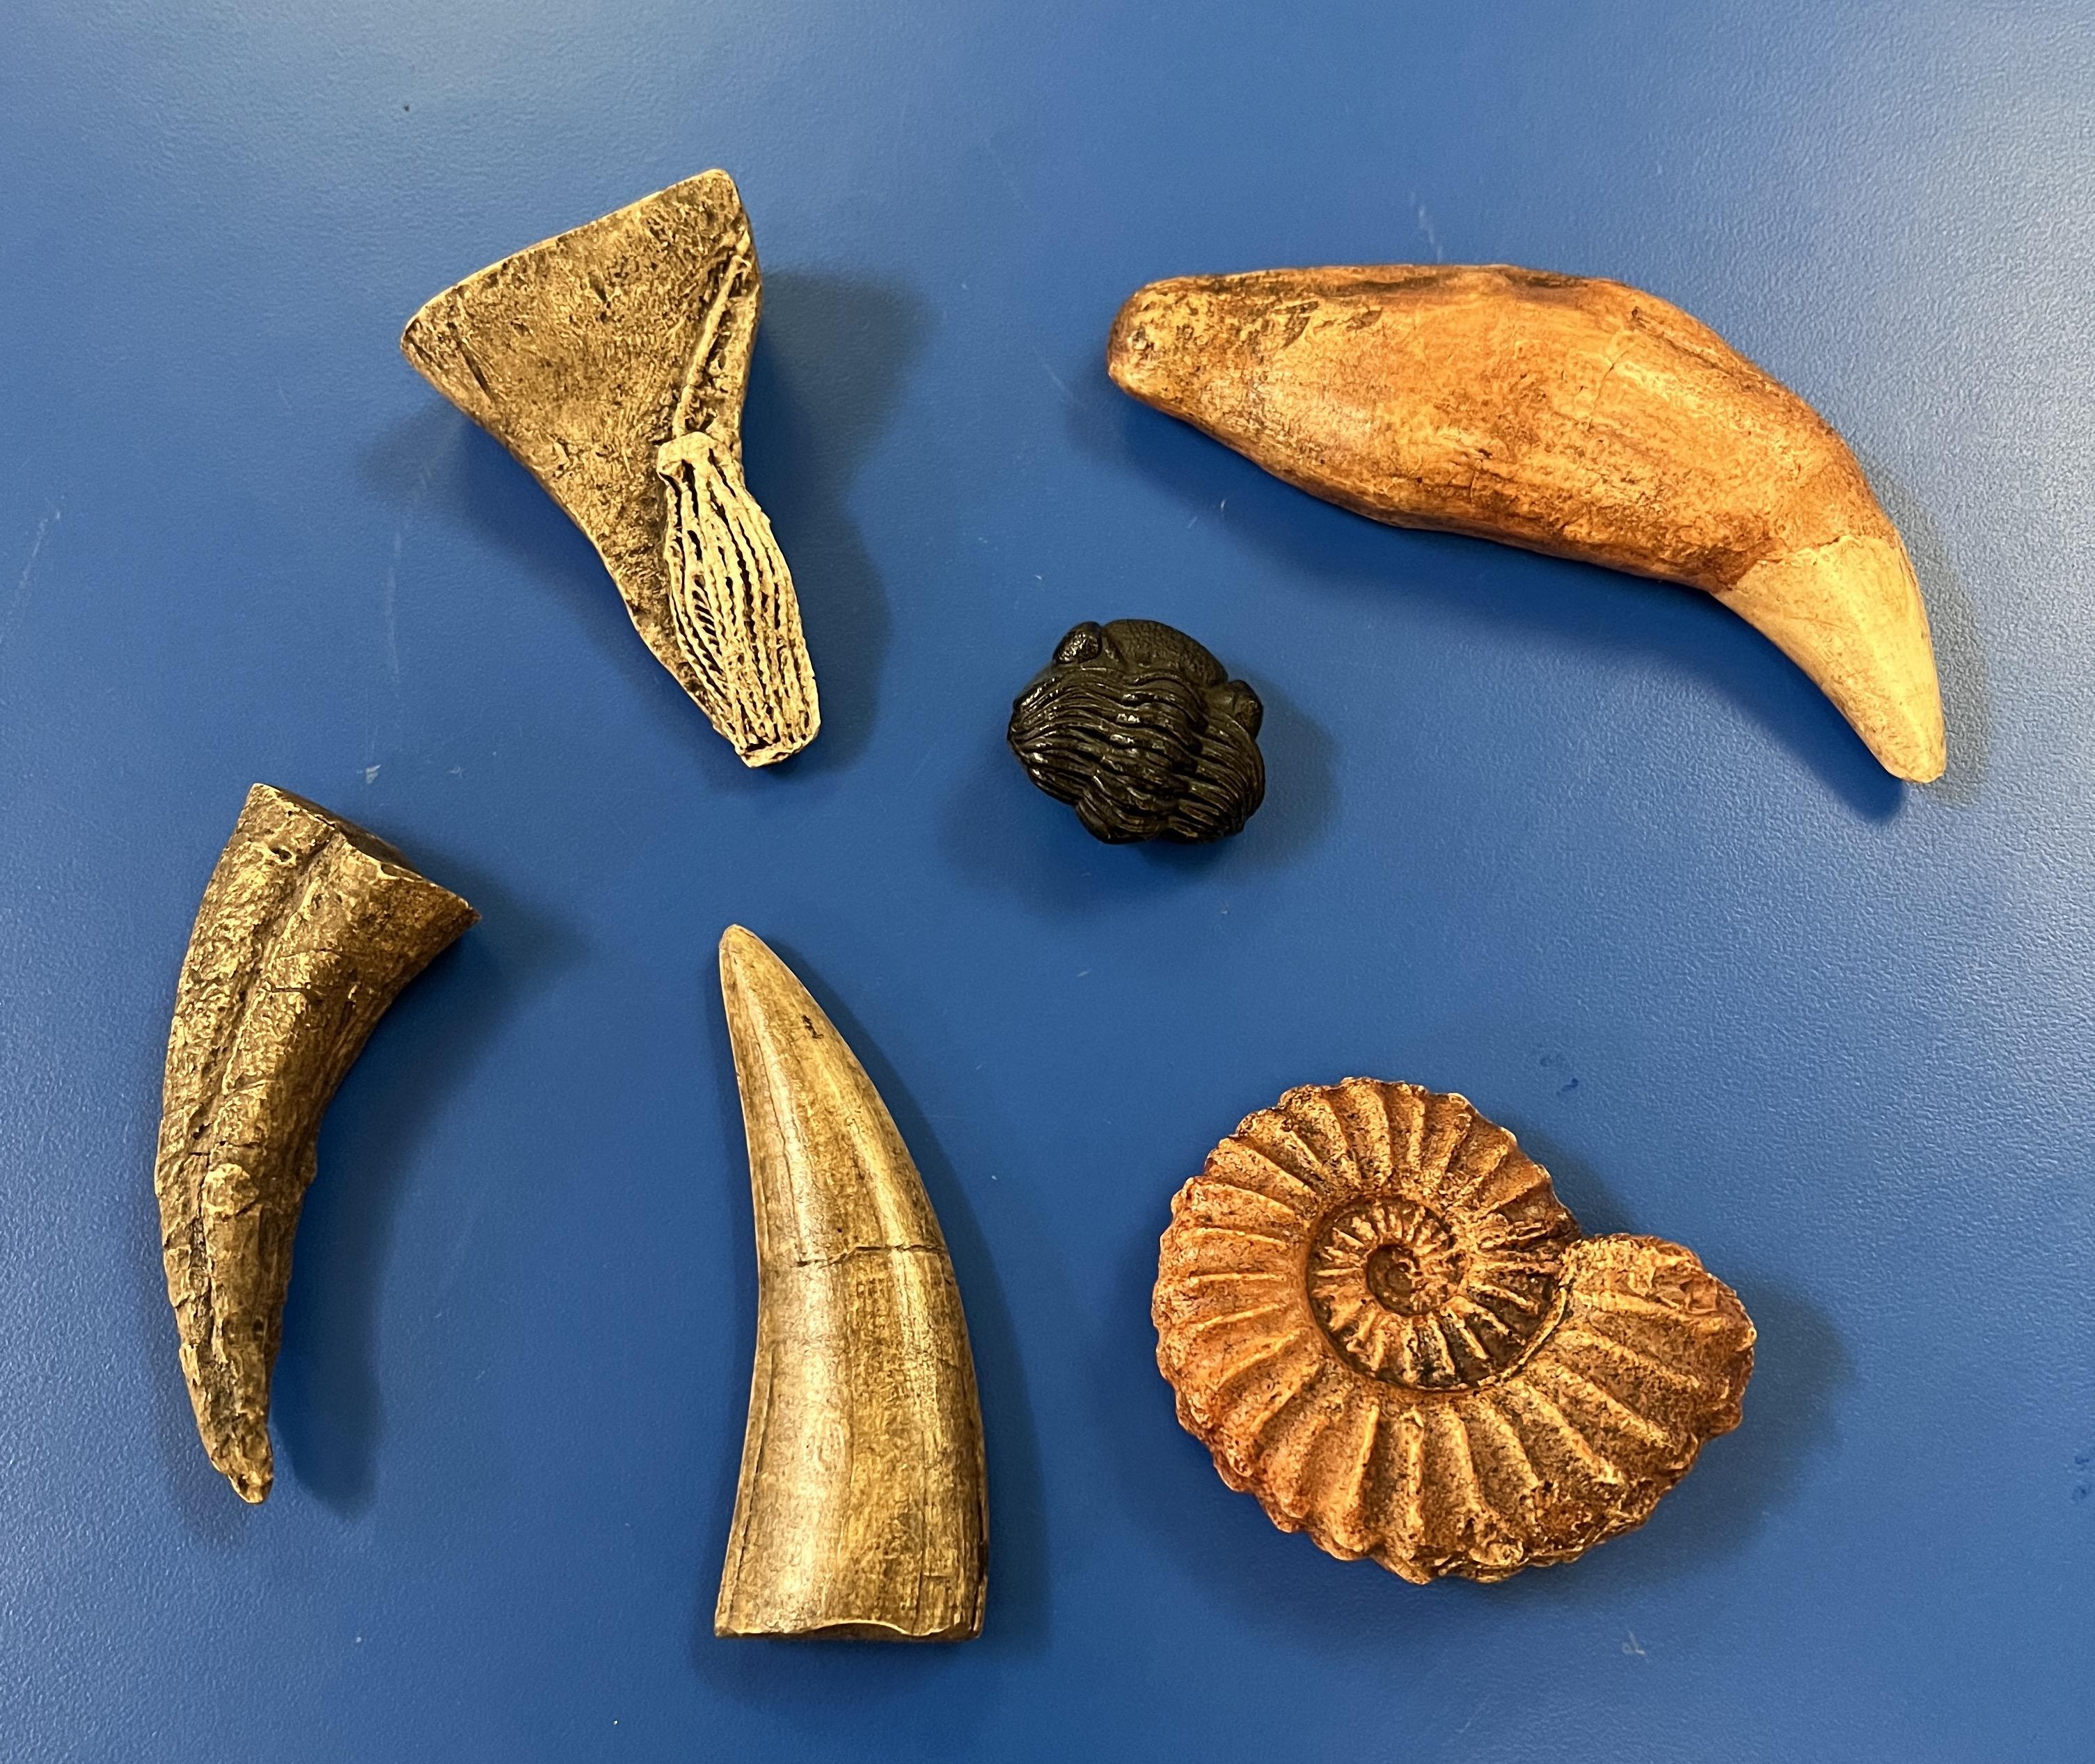 Some of the fossils